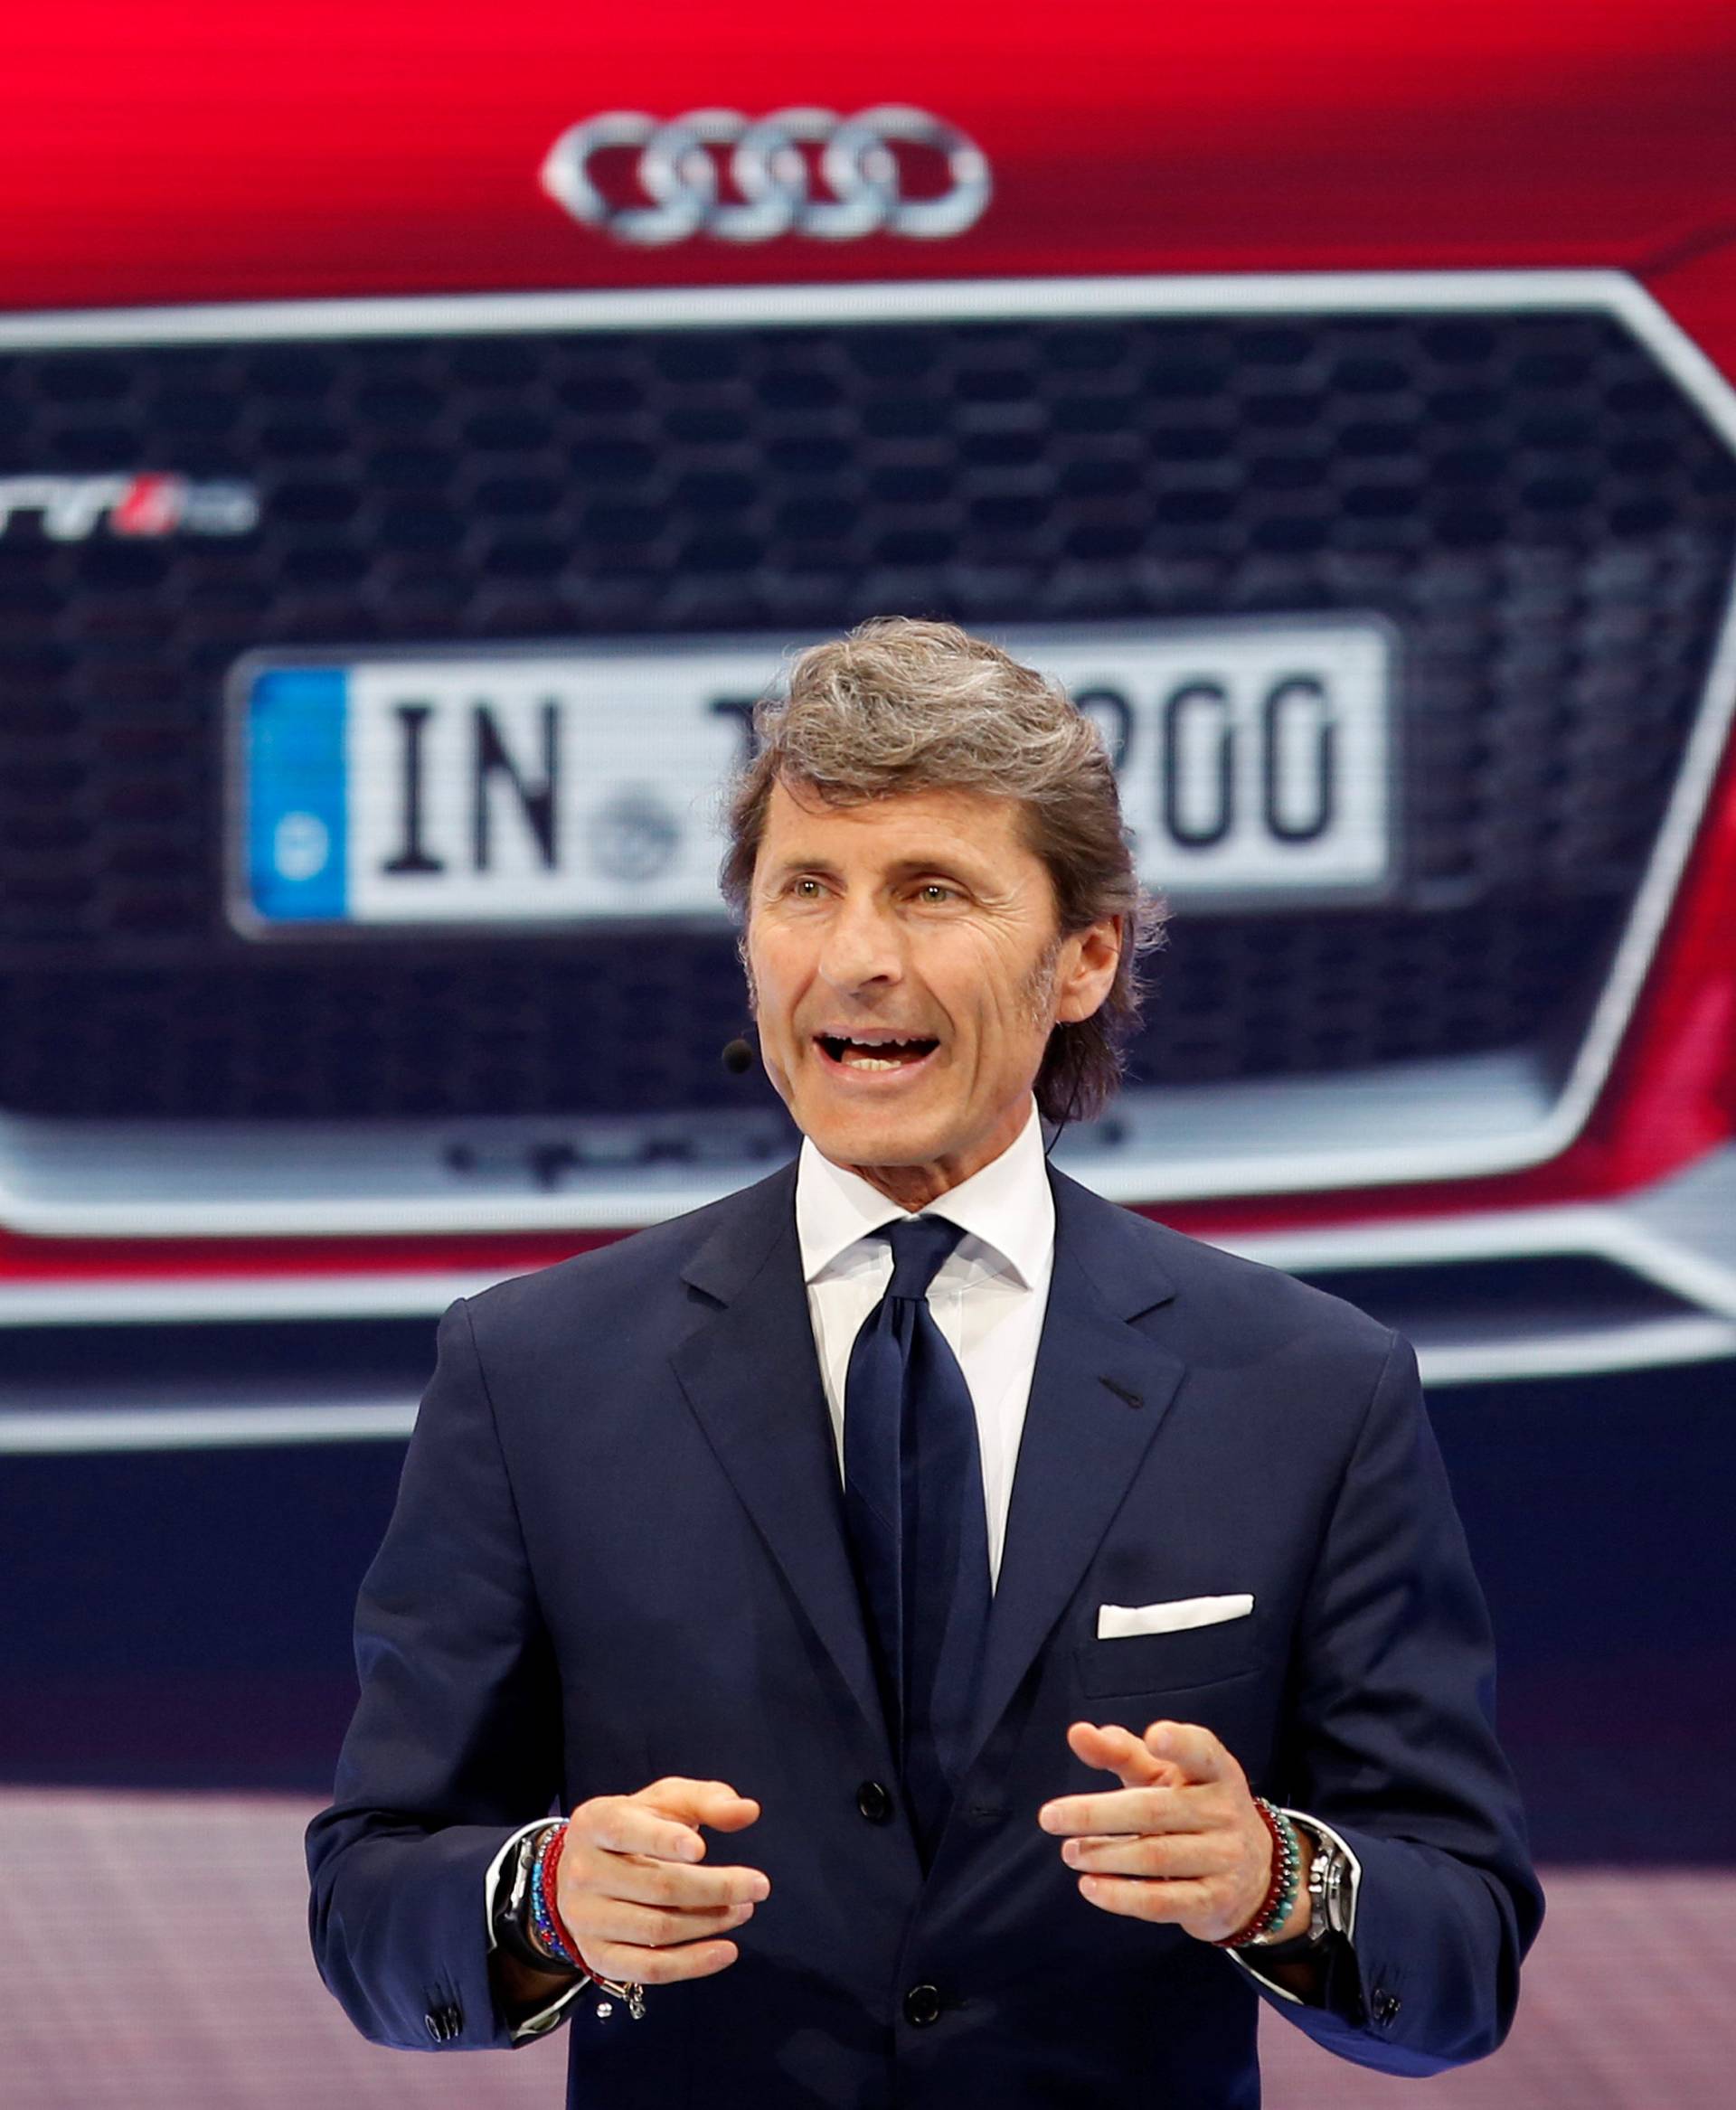 Stephan Winkelmann, CEO of quattro GmbH that includes the Audi Sport brand, makes a speech during the Auto China 2016 auto show in Beijing